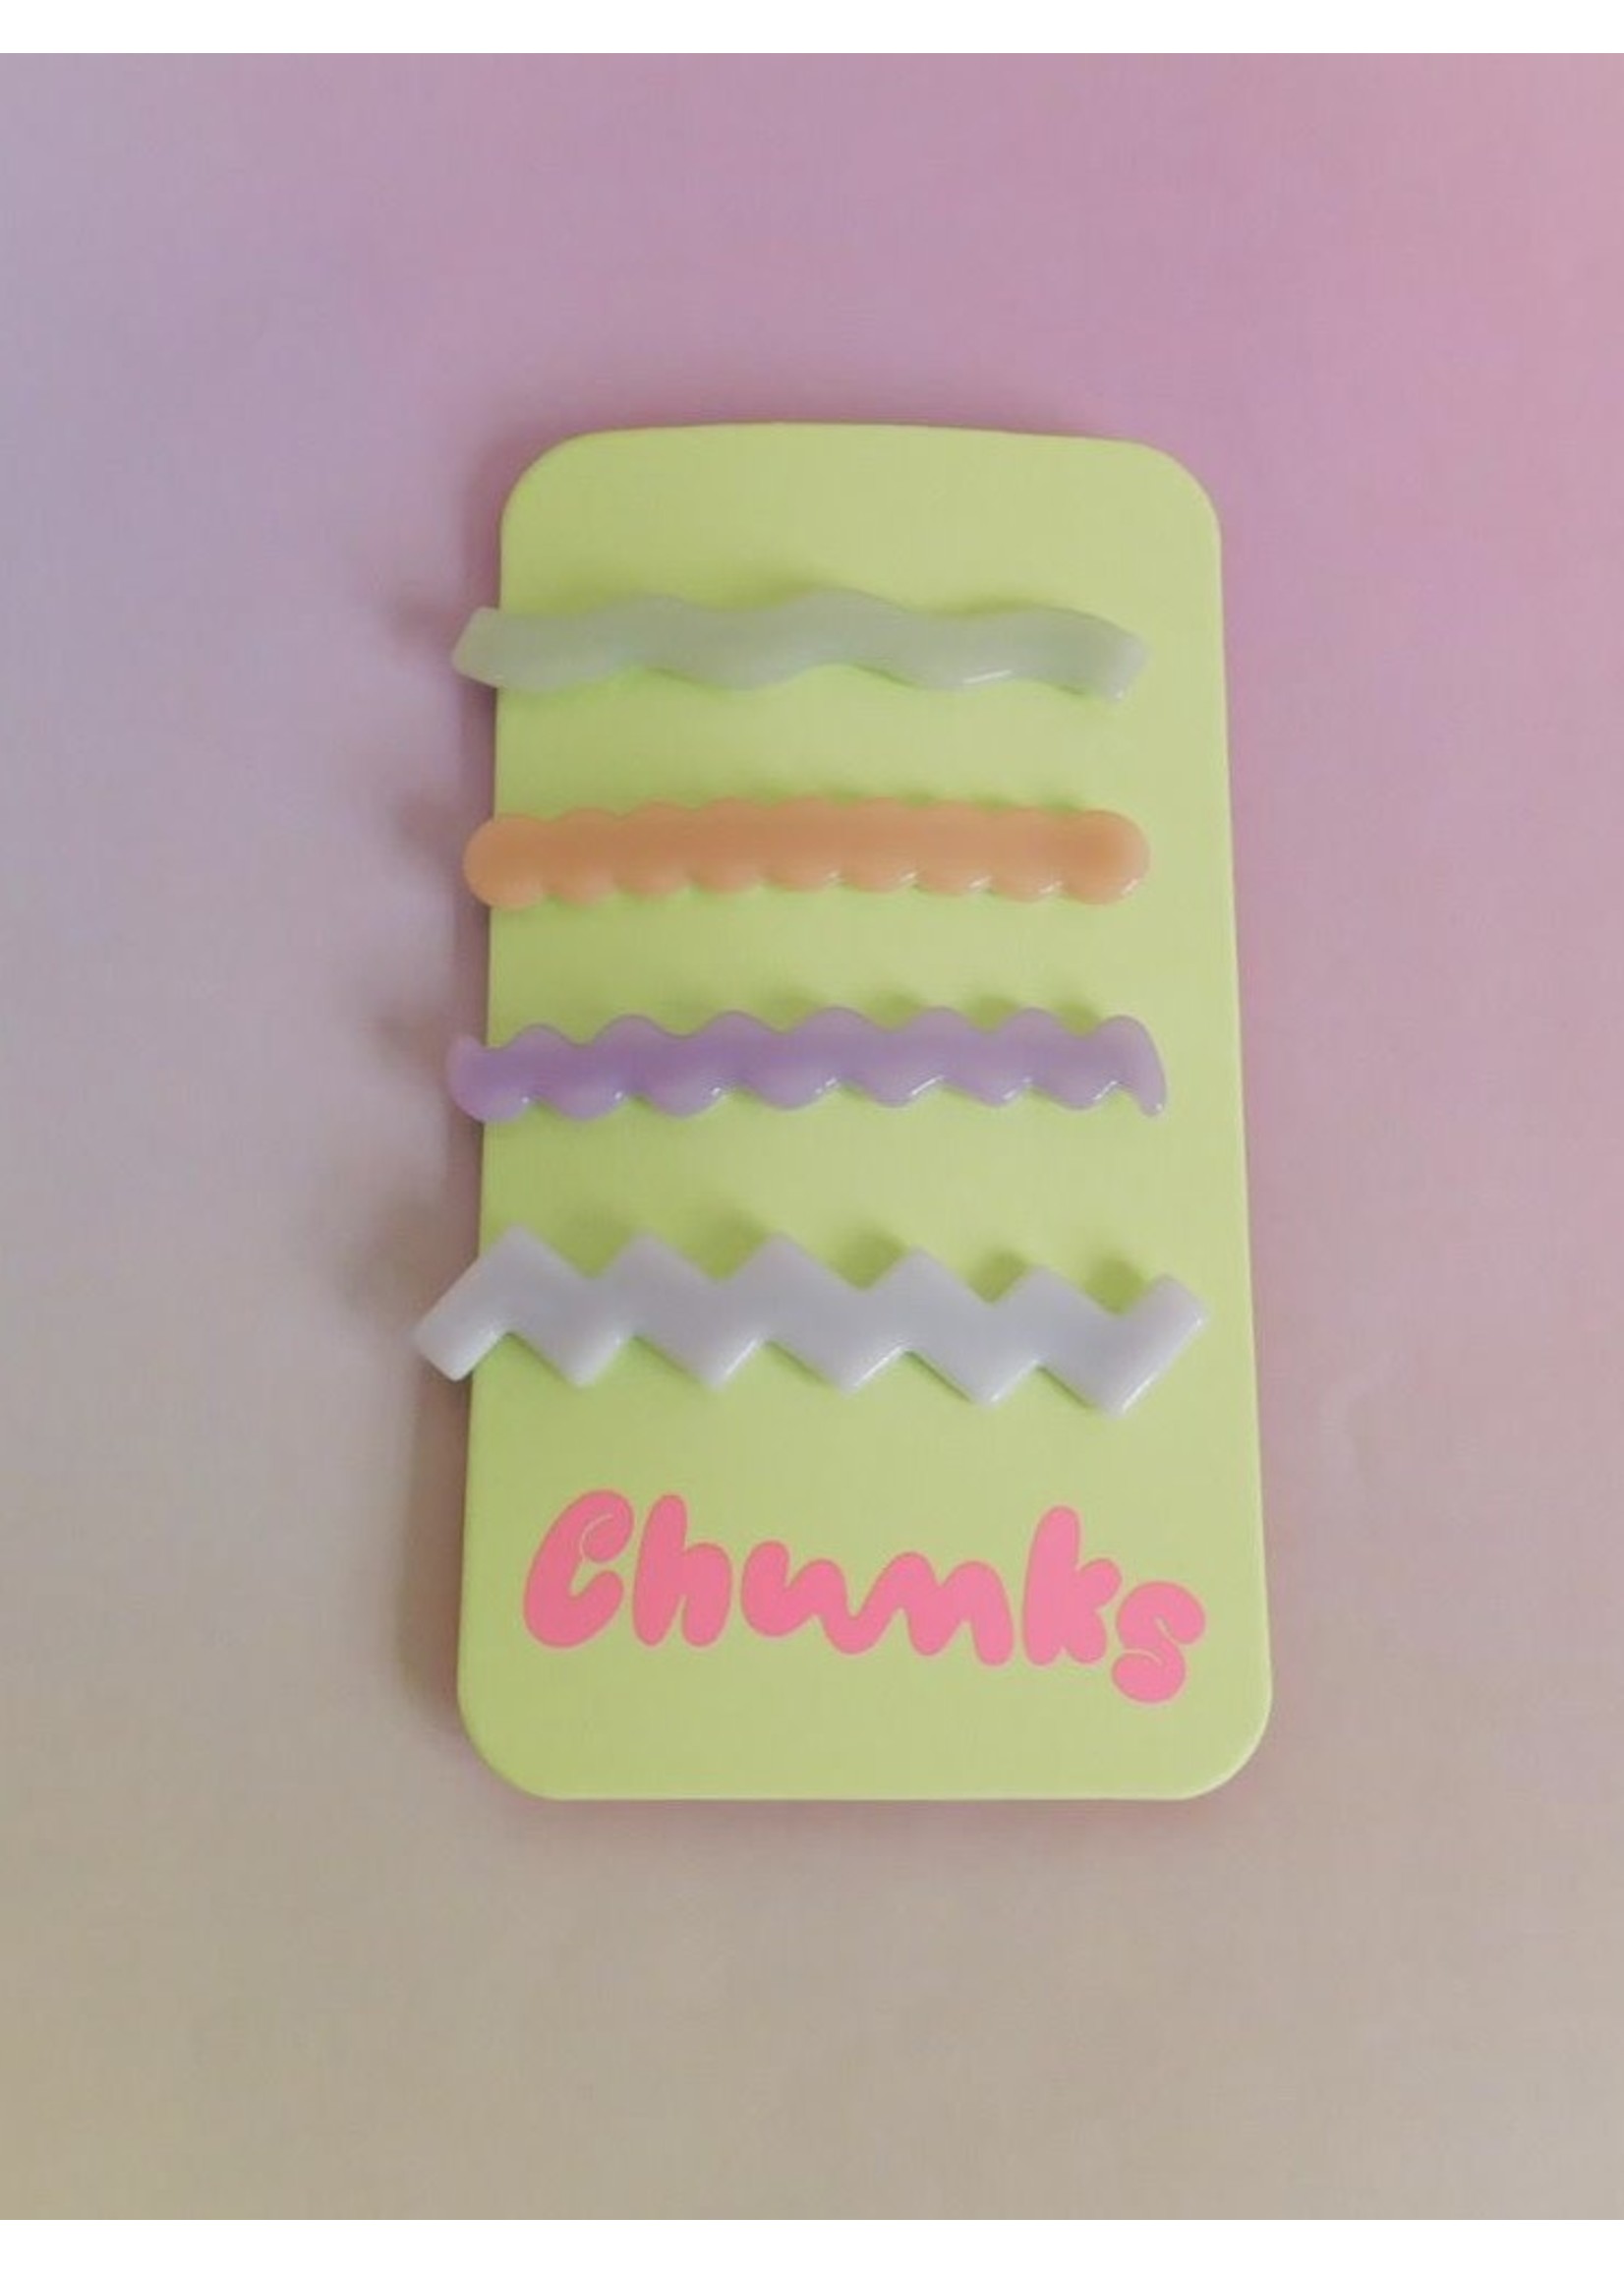 Chunks "Lines Slides" Pack of Barrettes by Chunks